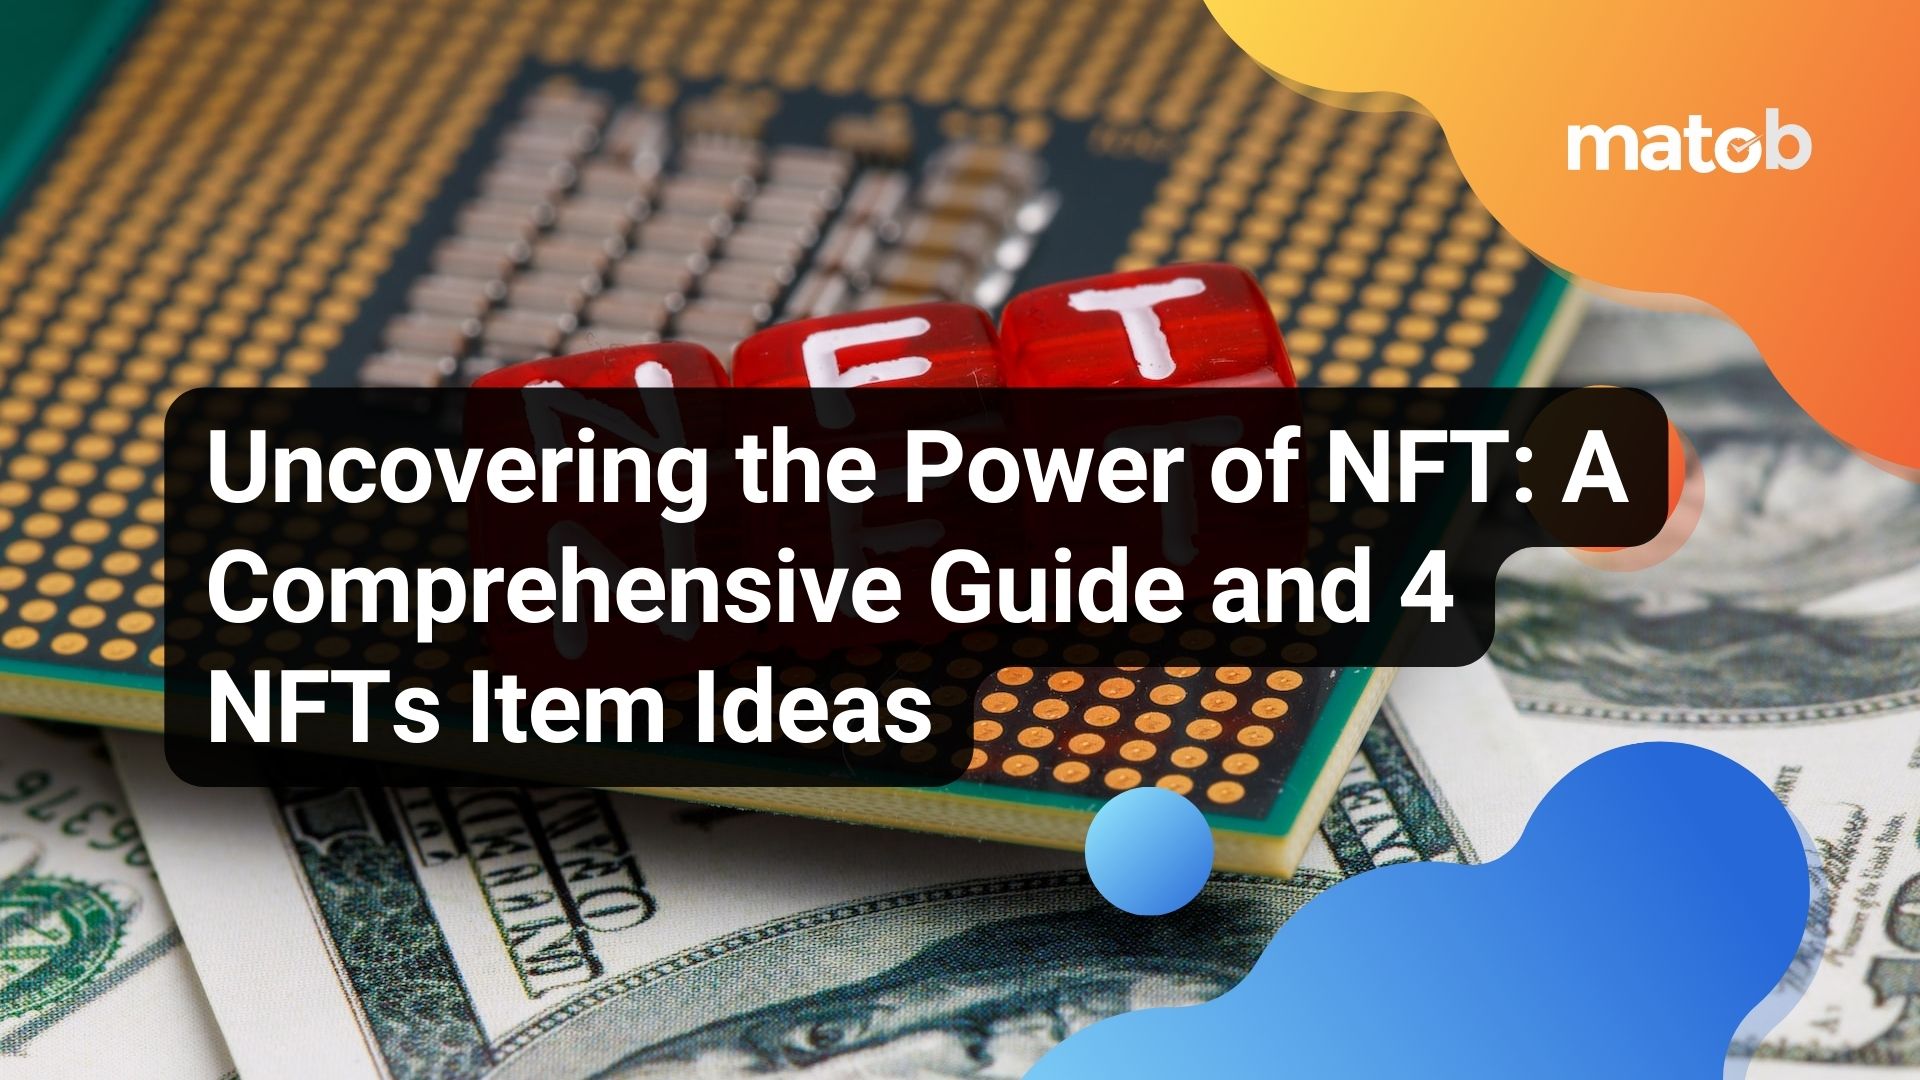 Uncovering the Power of NFT: A Comprehensive Guide and 4 NFTs Item Ideas